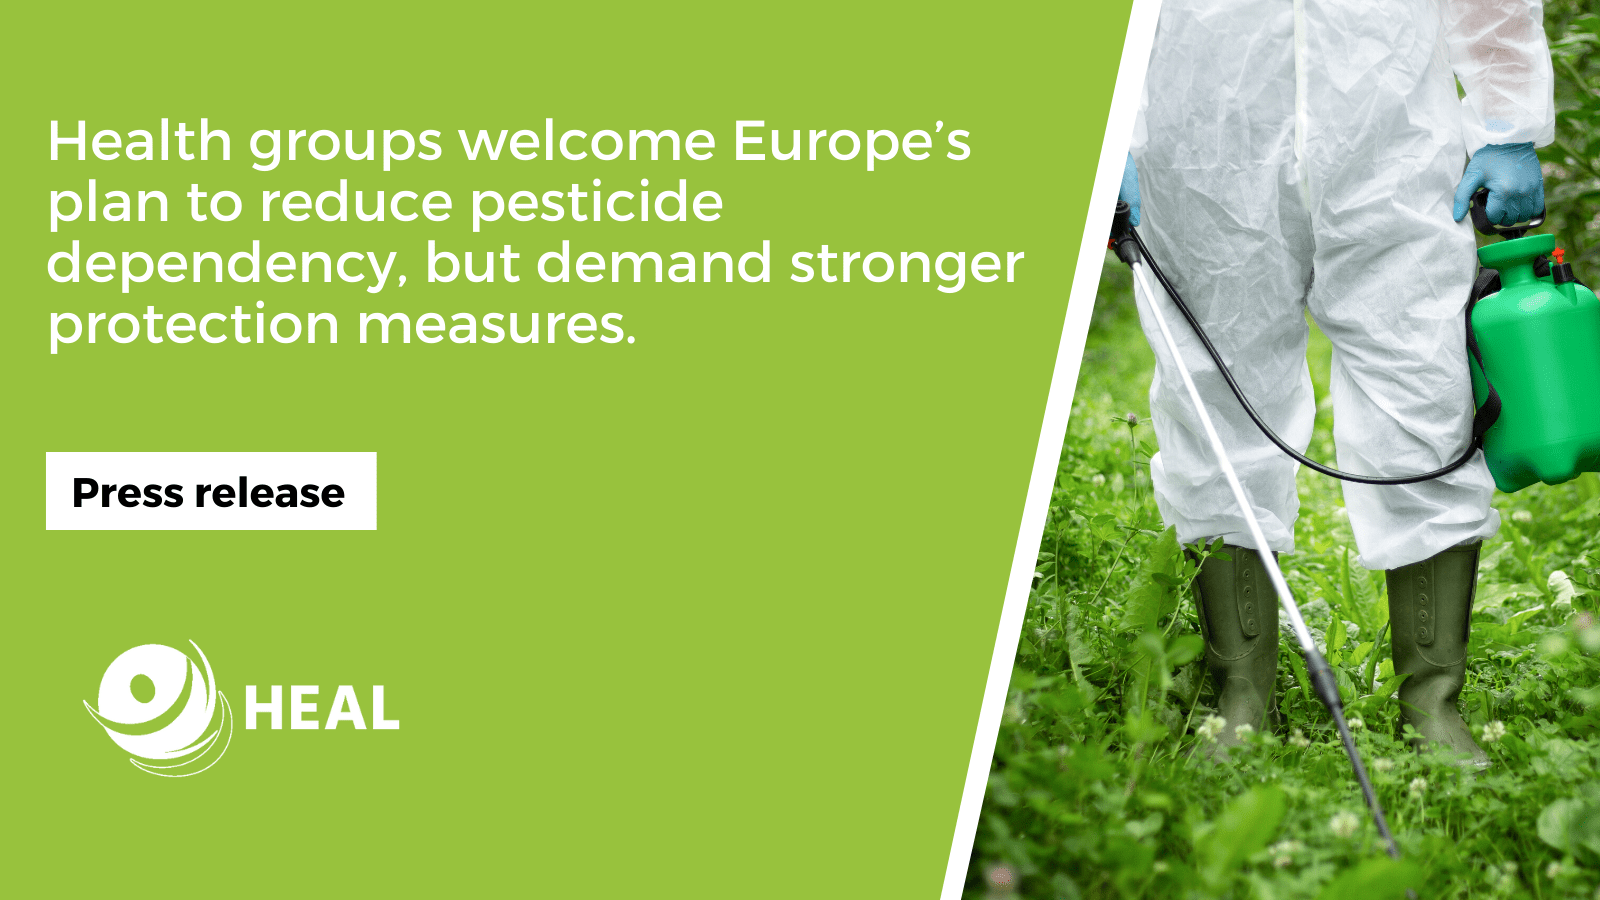 Health groups welcome Europe’s plan to reduce pesticide dependency but demand stronger protection measures